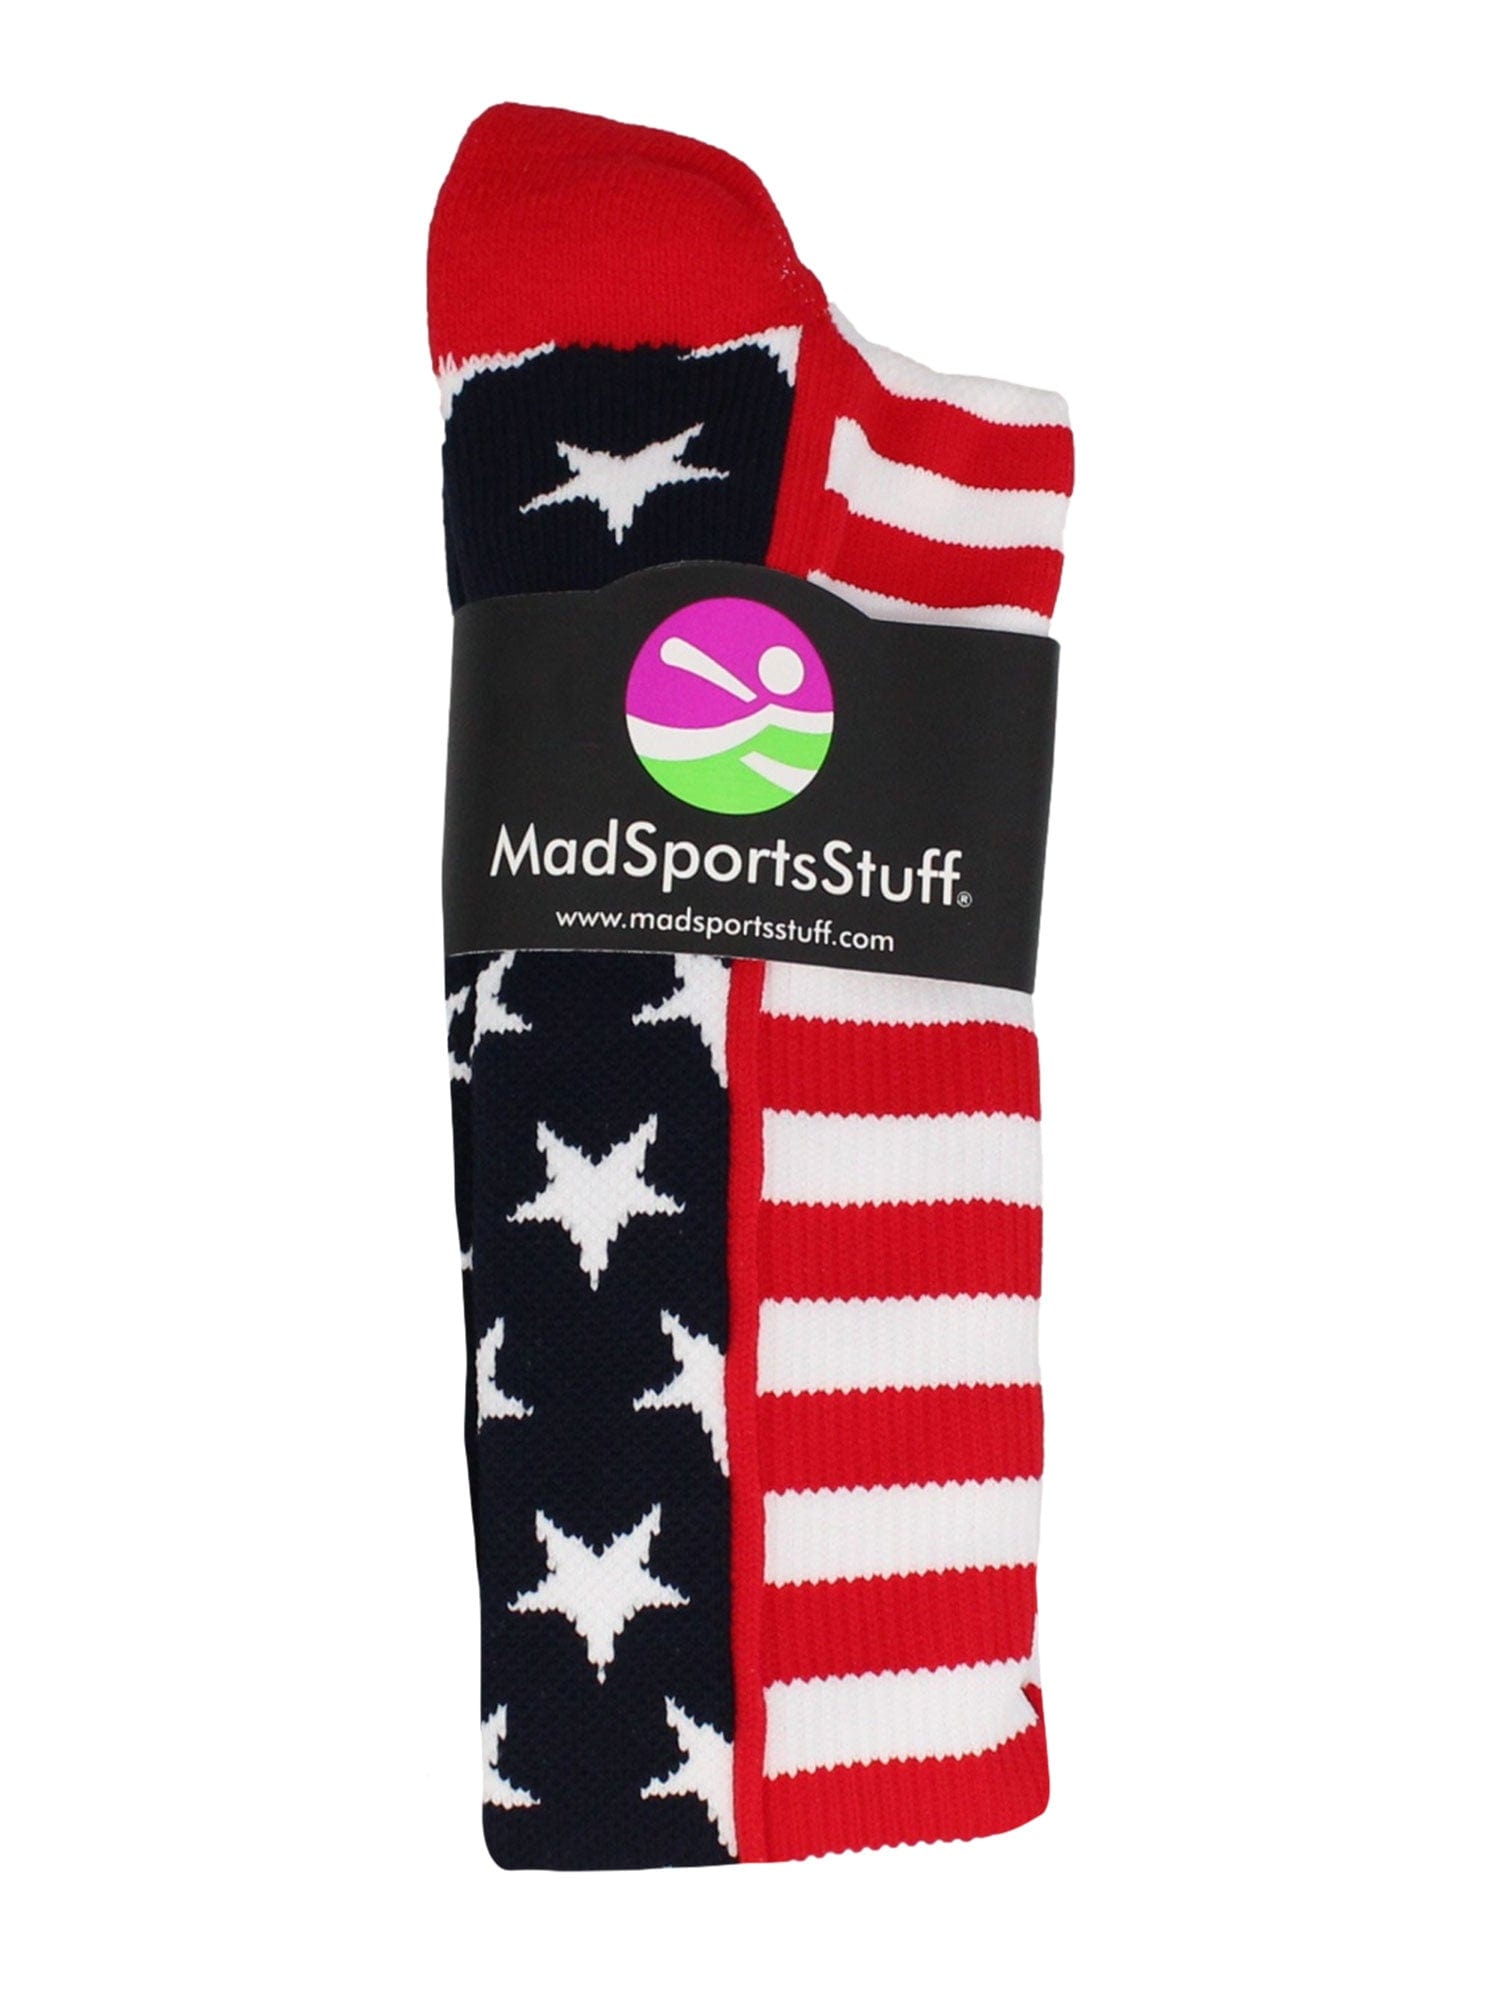  American Flag Dress Socks Made in the USA, Red/White